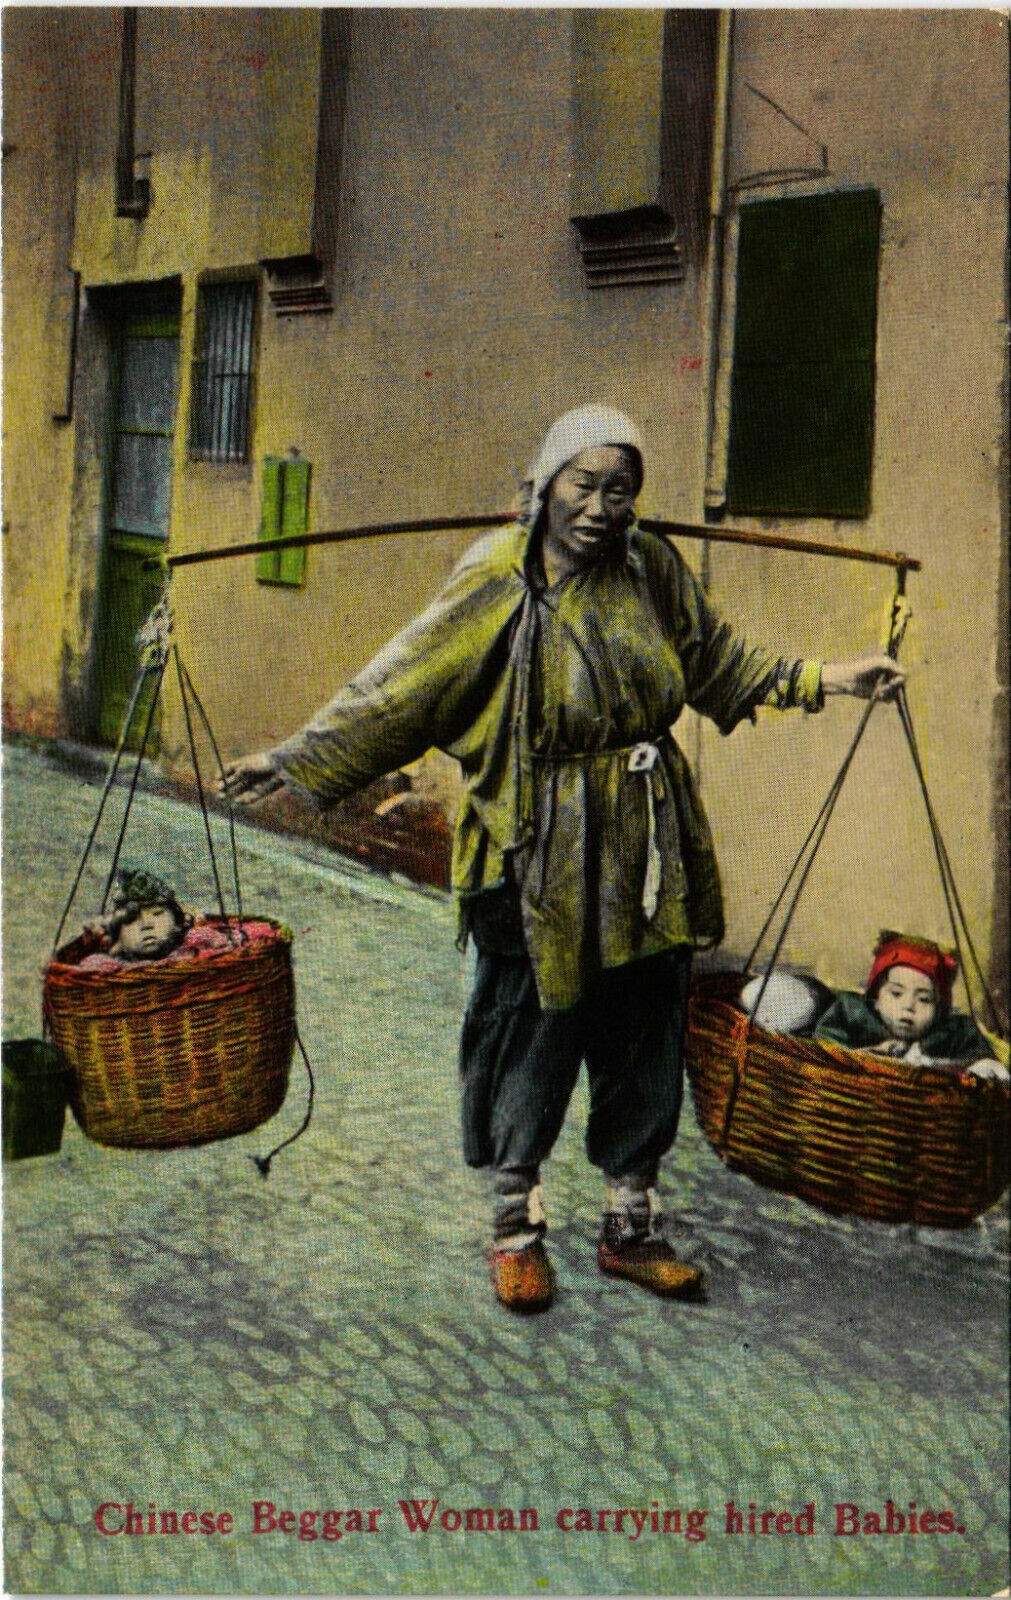 PC CPA CHINA, CHINESE BEGGAR WOMAN CARRYING BABIES, VINTAGE POSTCARD (b18491)